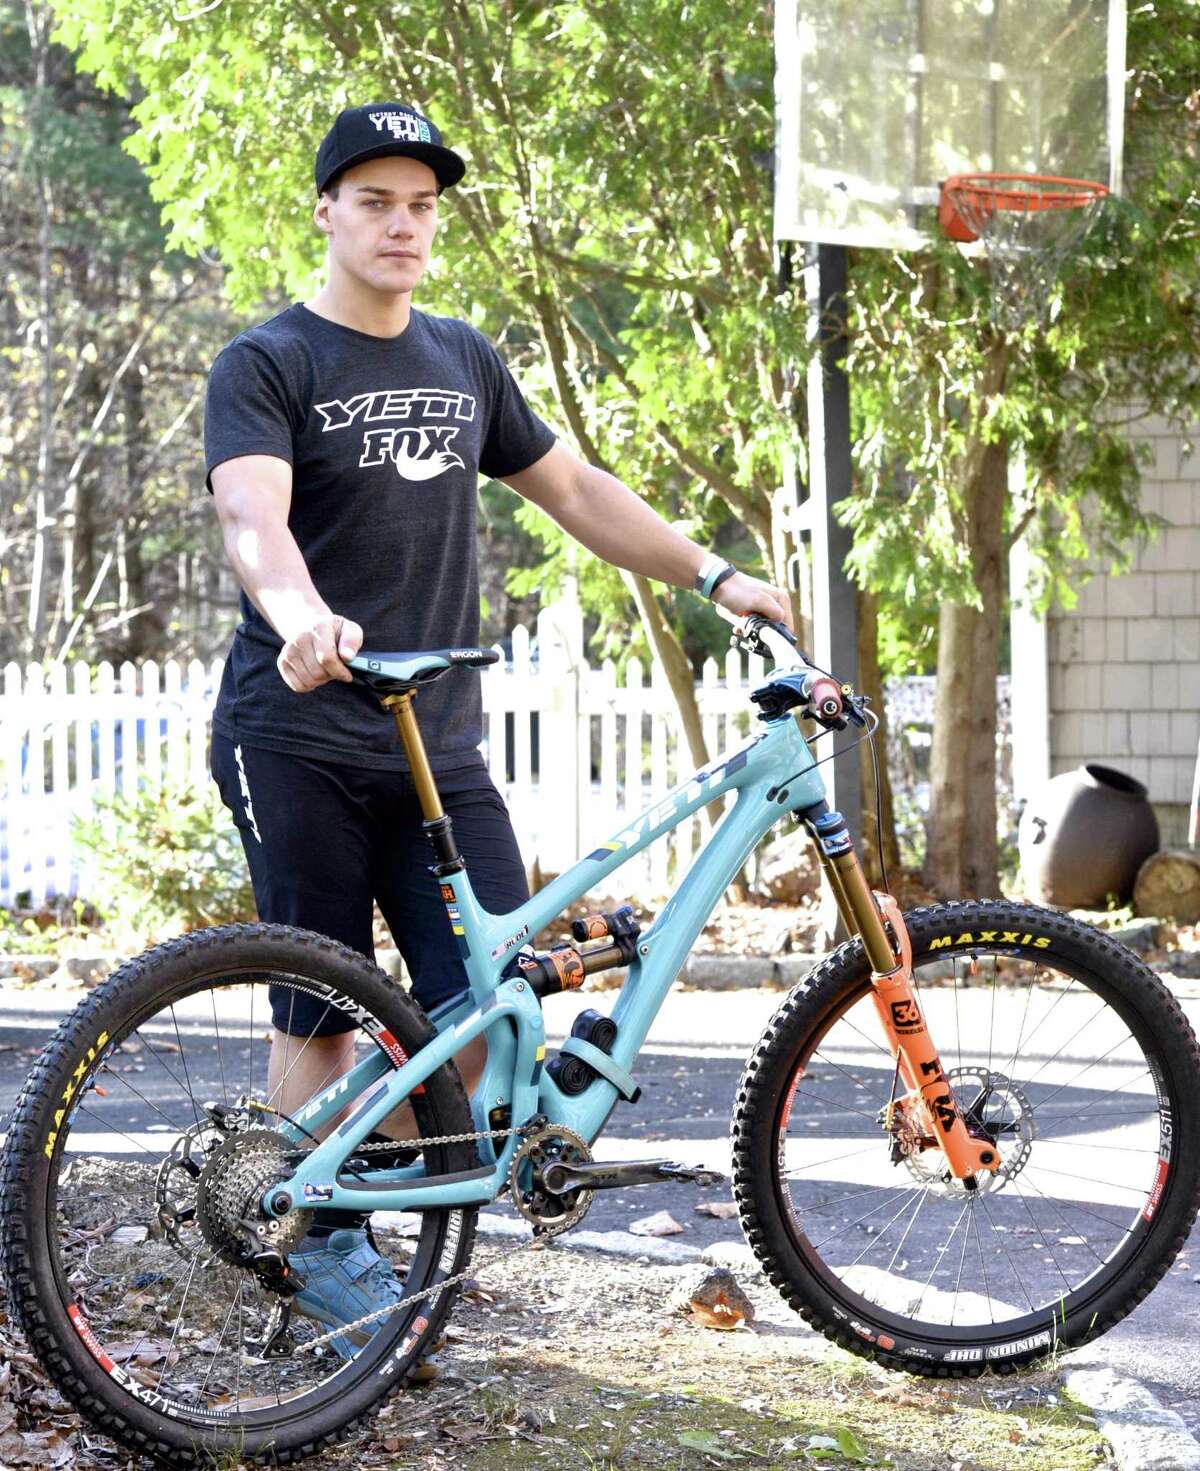 Redding, Conn. resident Richie Rude, in November 2016 with a bicycle equipped with a Fox Factory suspension fork. Rude is a multiple winner of the Enduro World Series riding competition with the Yeti Fox Factory Enduro Team. On March 13, 2017, Westport, Conn.-based Compass Diversified Holdings announced the sale of its remaining shares of Scotts Valley, Calif.-based Fox Factory, which also makes shock-absorbing suspensions for motorcycles, snowmobiles and all-terrain vehicles among others. Compass realized a $525 million gain from its ownership of Fox Factory, which it acquired in 2008 and took public in 2013. (Cindy Schultz / Times Union)